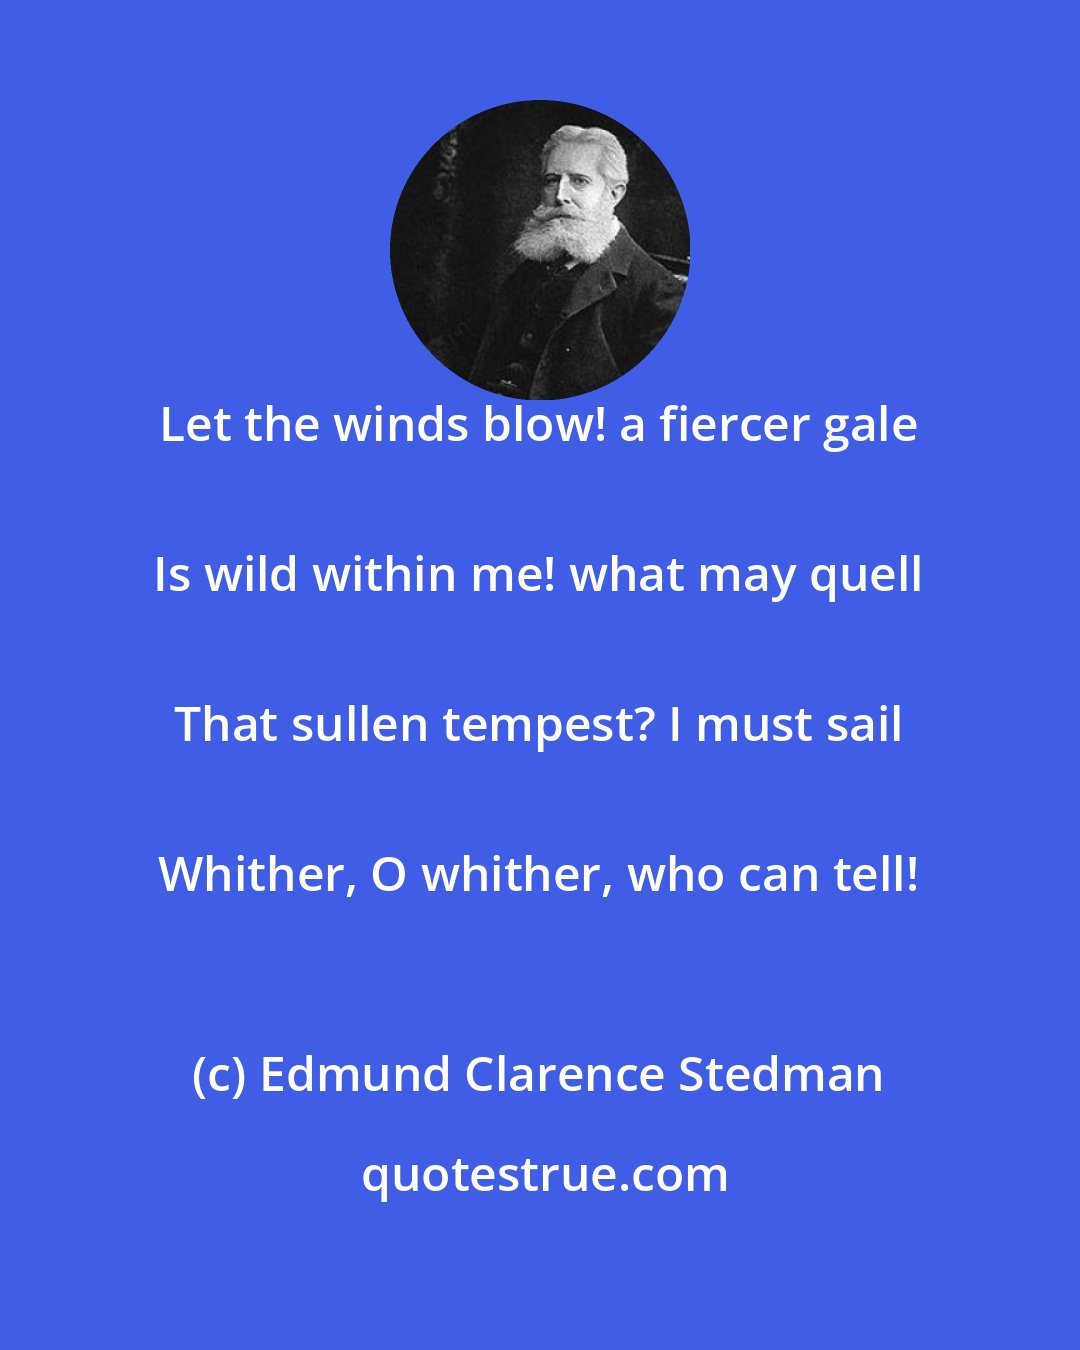 Edmund Clarence Stedman: Let the winds blow! a fiercer gale 
 Is wild within me! what may quell 
 That sullen tempest? I must sail 
 Whither, O whither, who can tell!